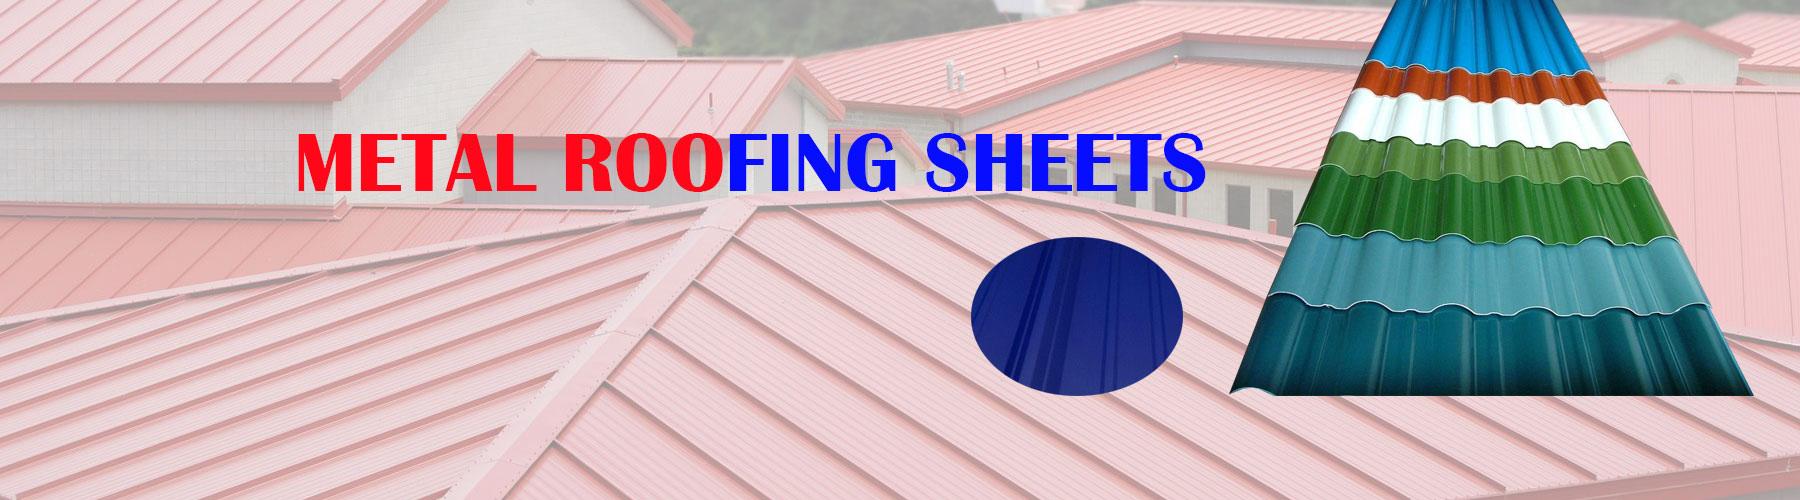 Roofing Sheet Manufacturers